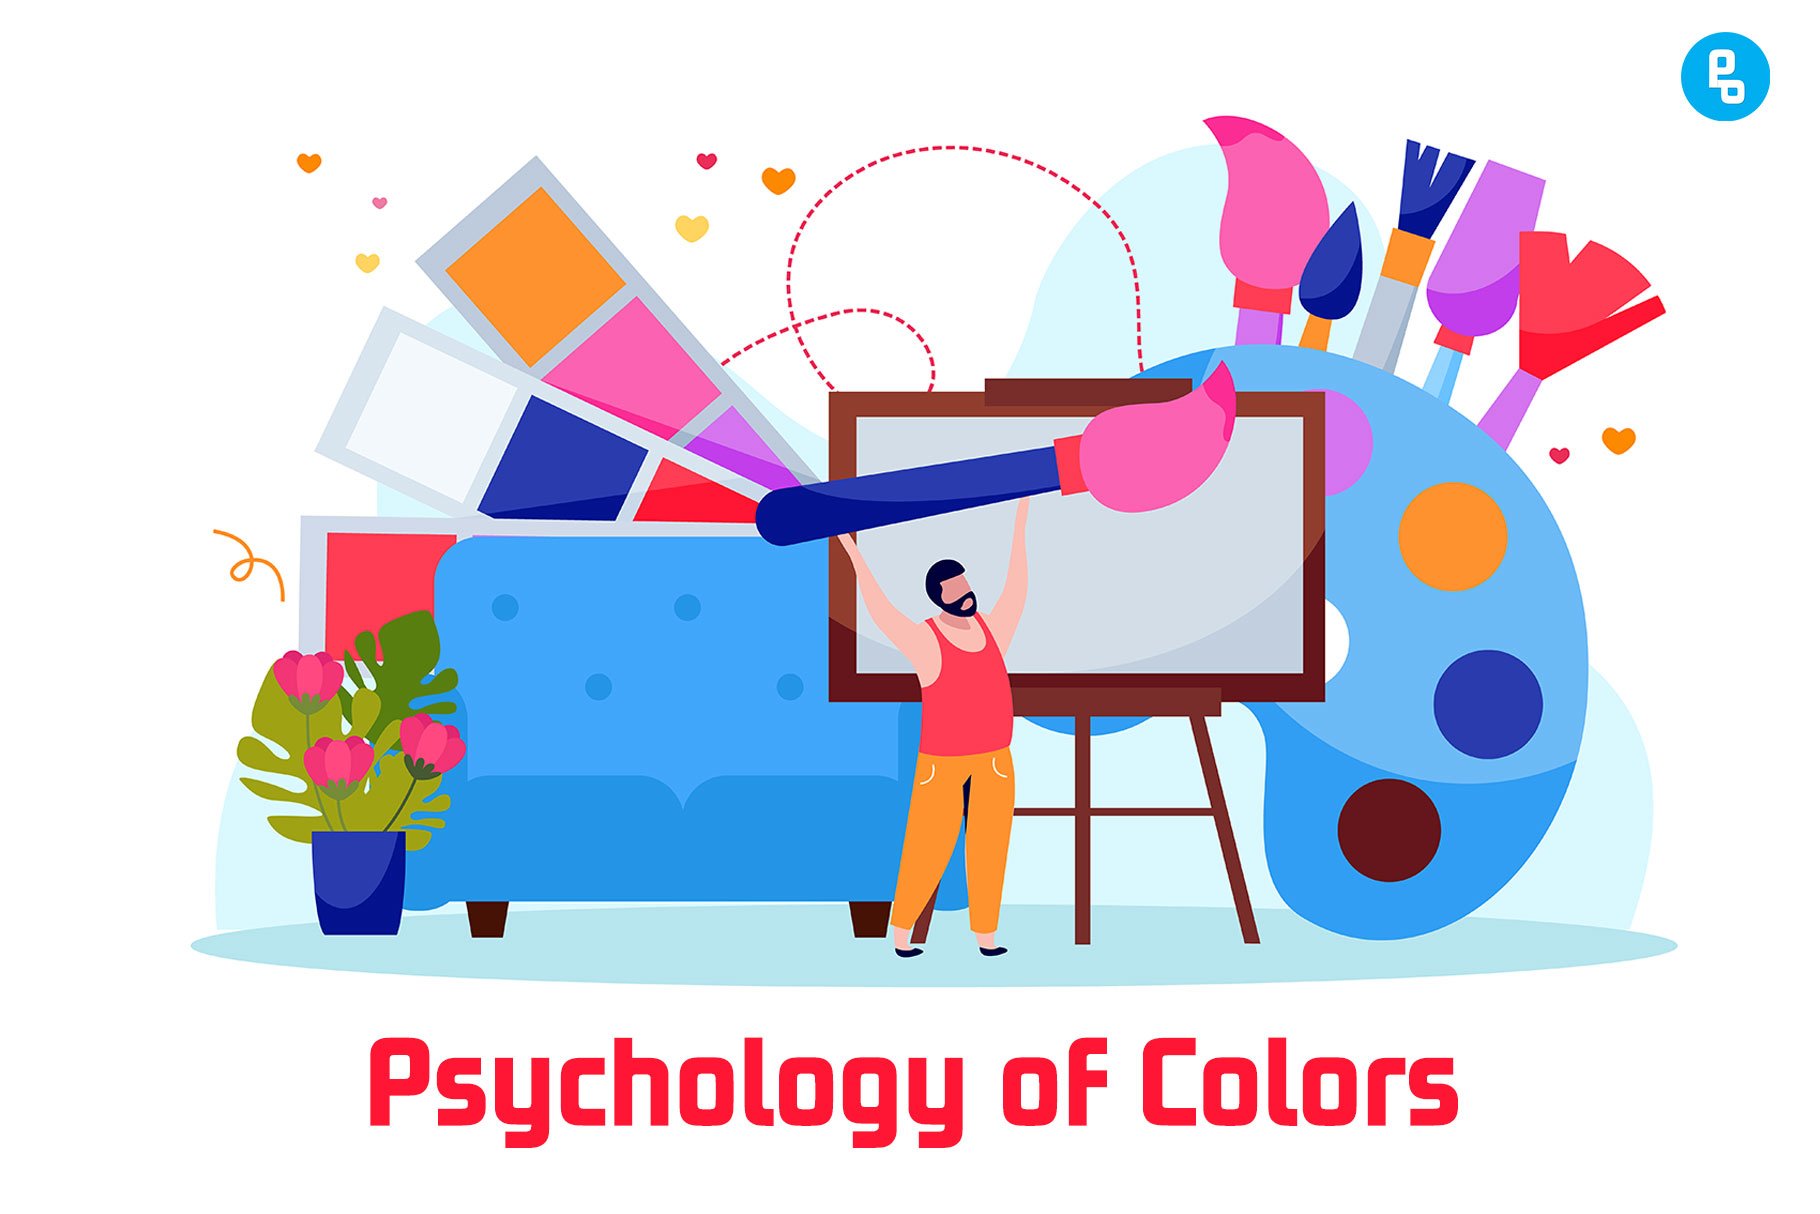 This article will explain everything you need to know about how to use color psychology in logo design and branding.